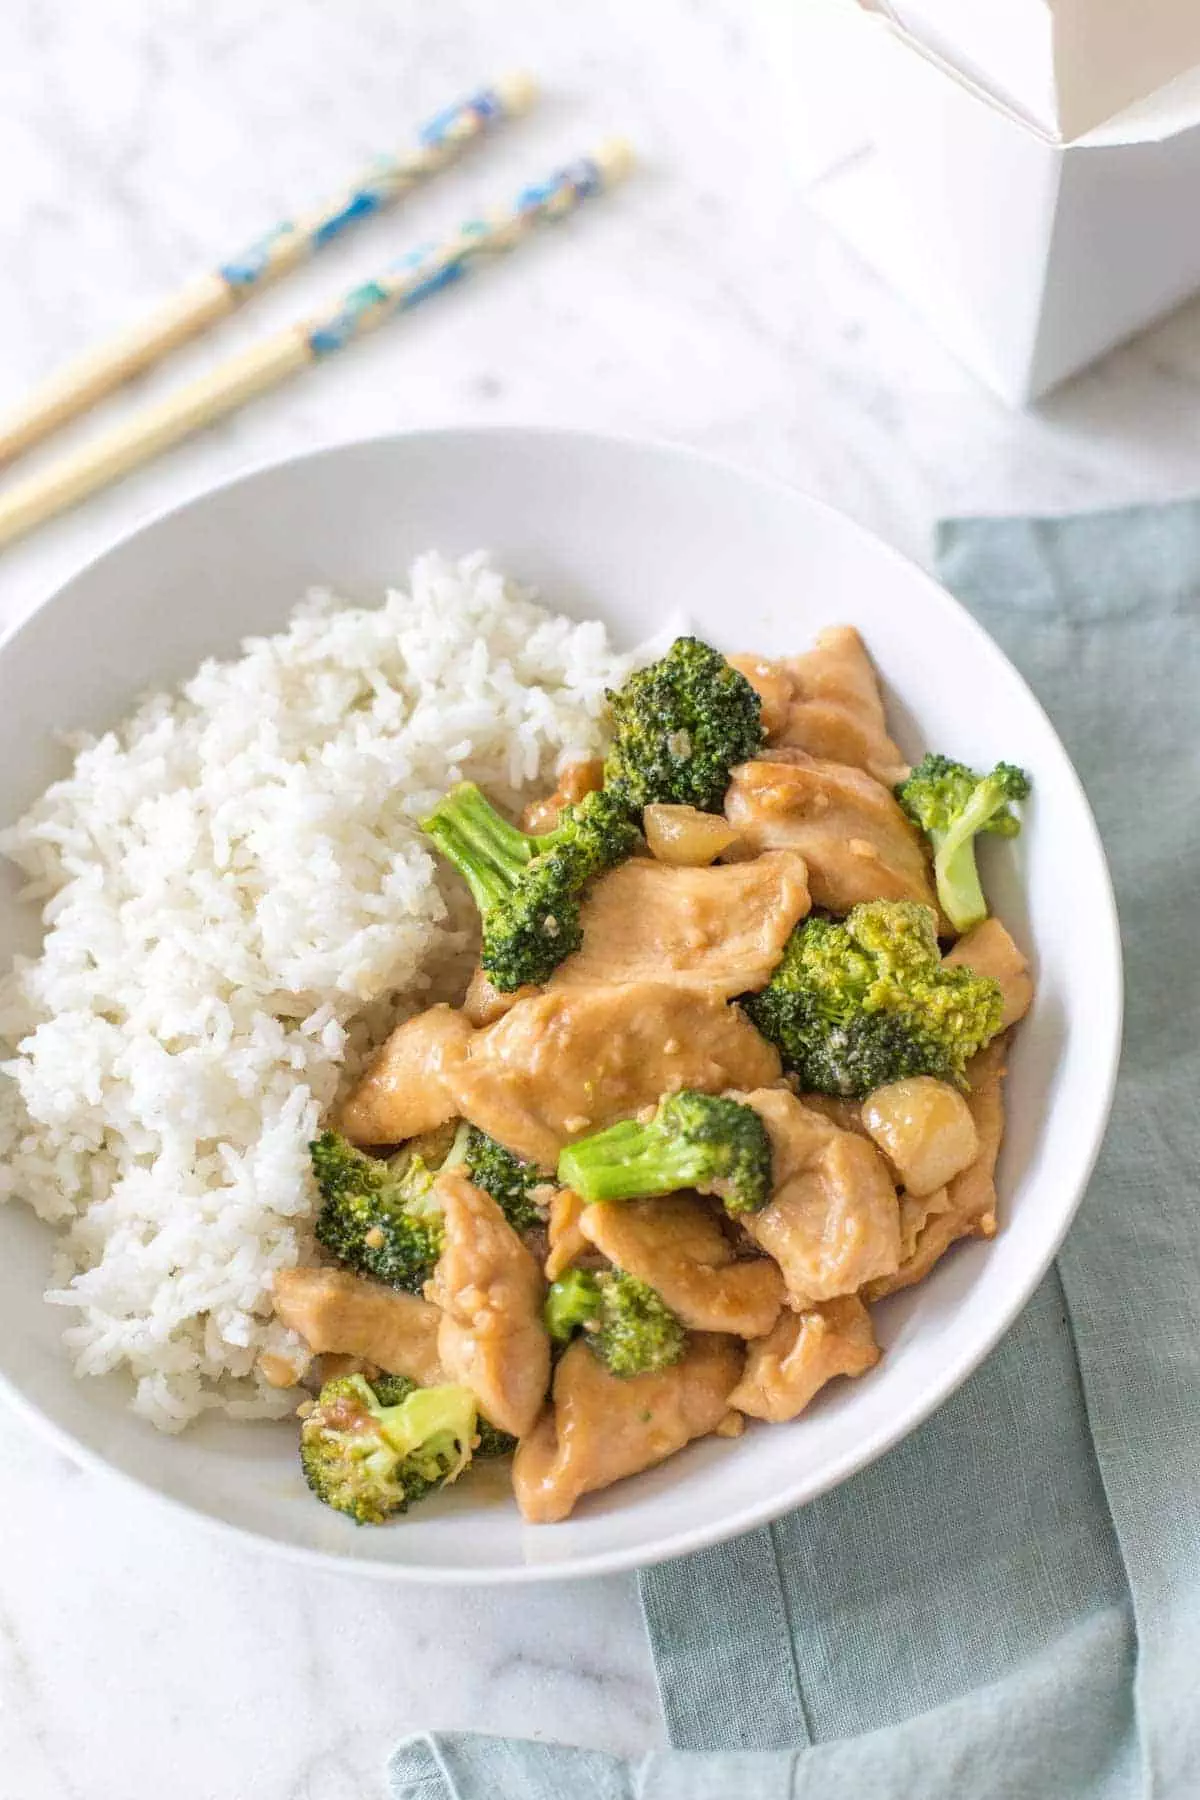 easy chinese chicken with broccoli is a one of the delicious kitchen staples recipes on our list